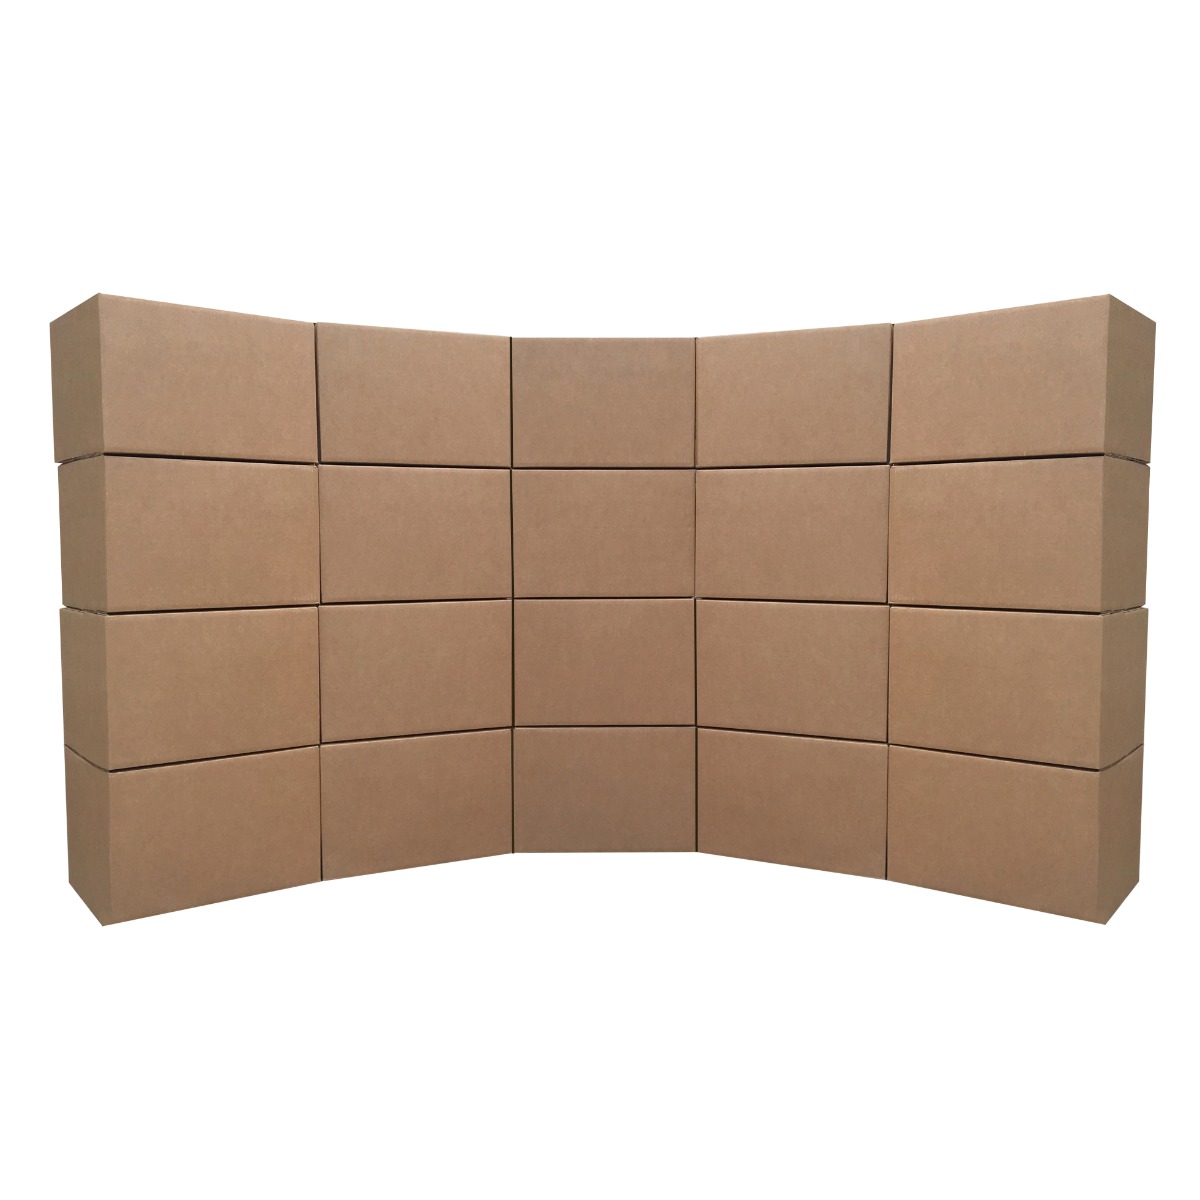 uBoxes Medium Cardboard Moving Boxes (20 Pack) 18 x 14 x 12-Inch - image 4 of 13